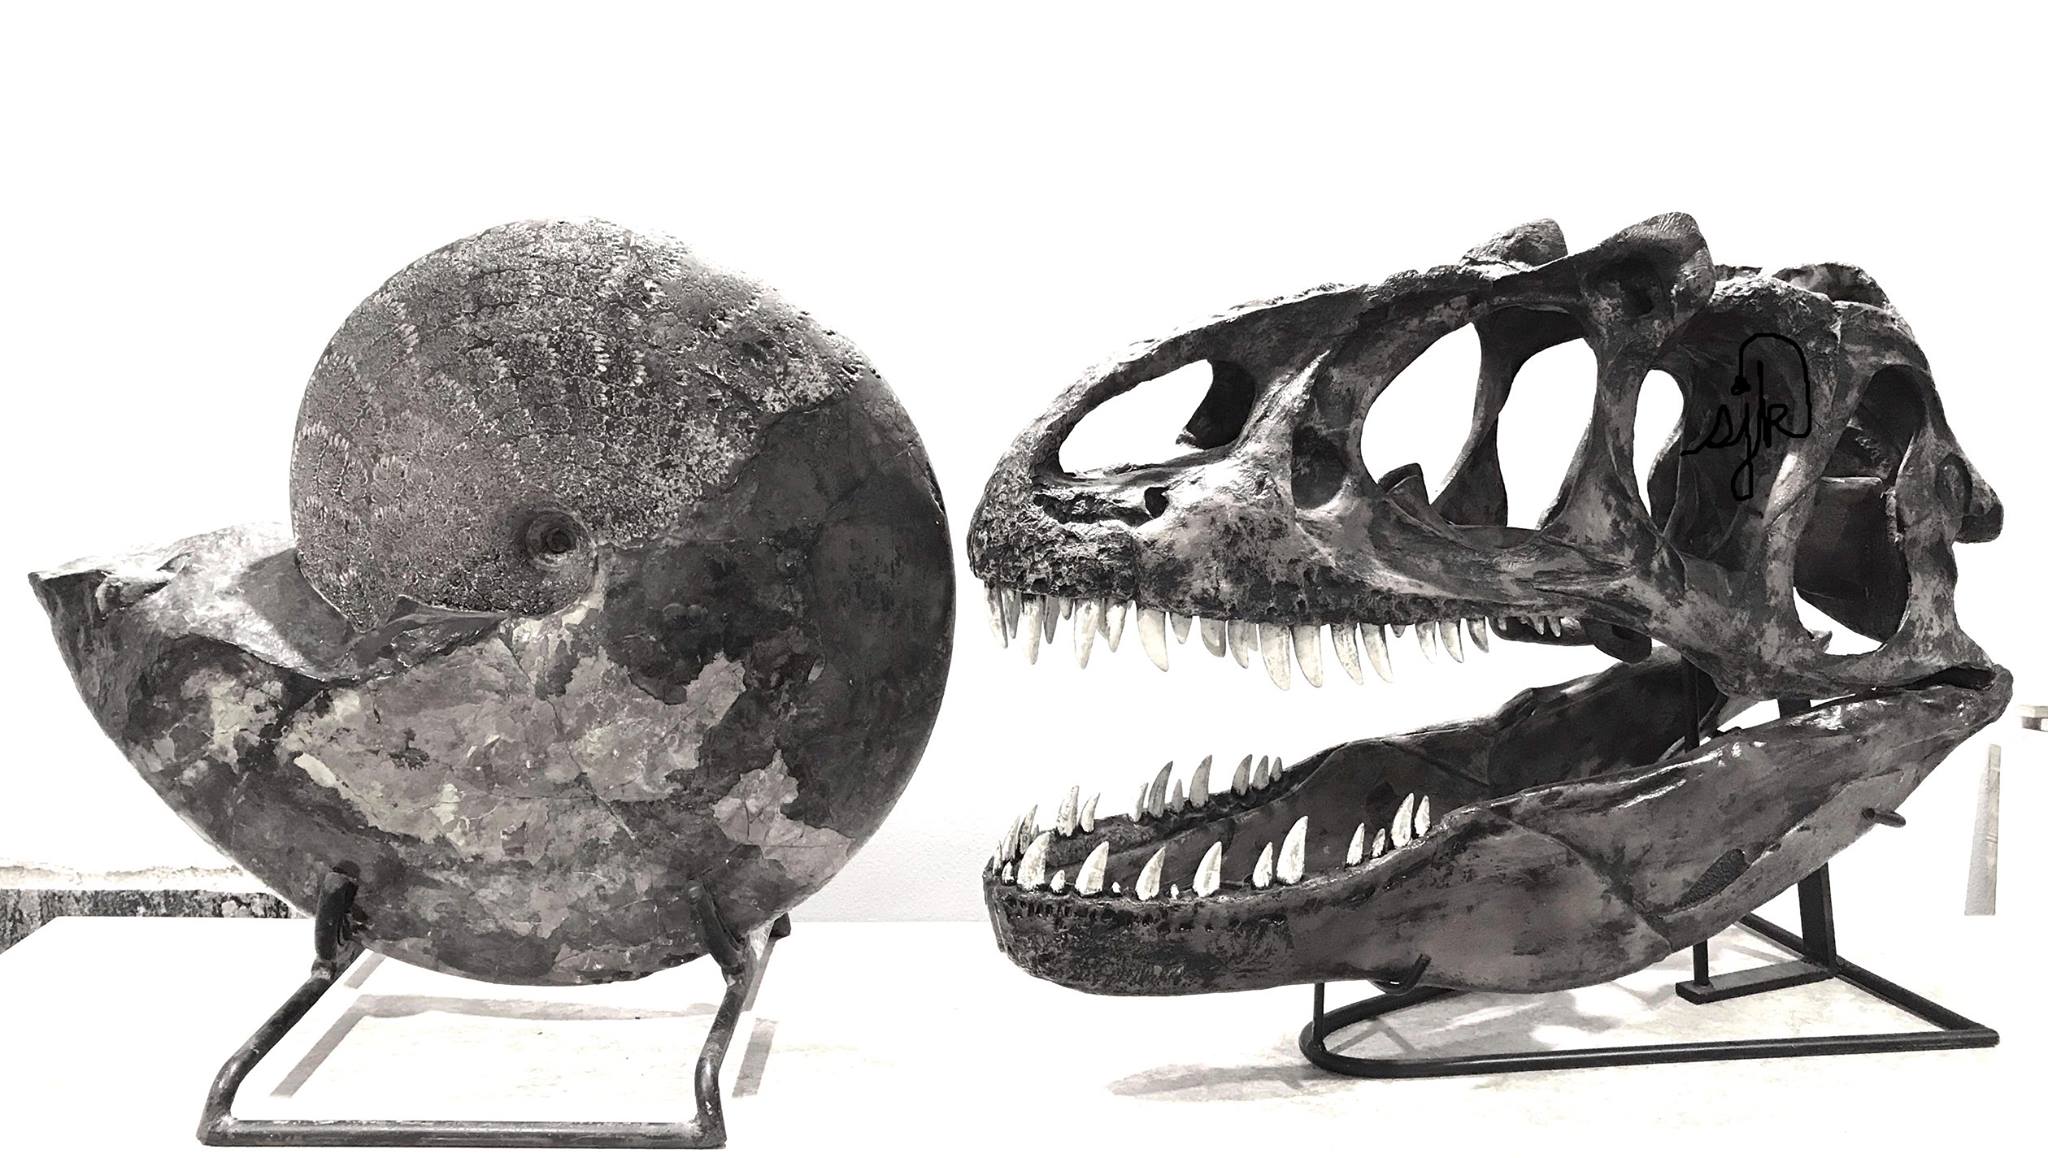 photo of t-rex skull and ammonite fossil